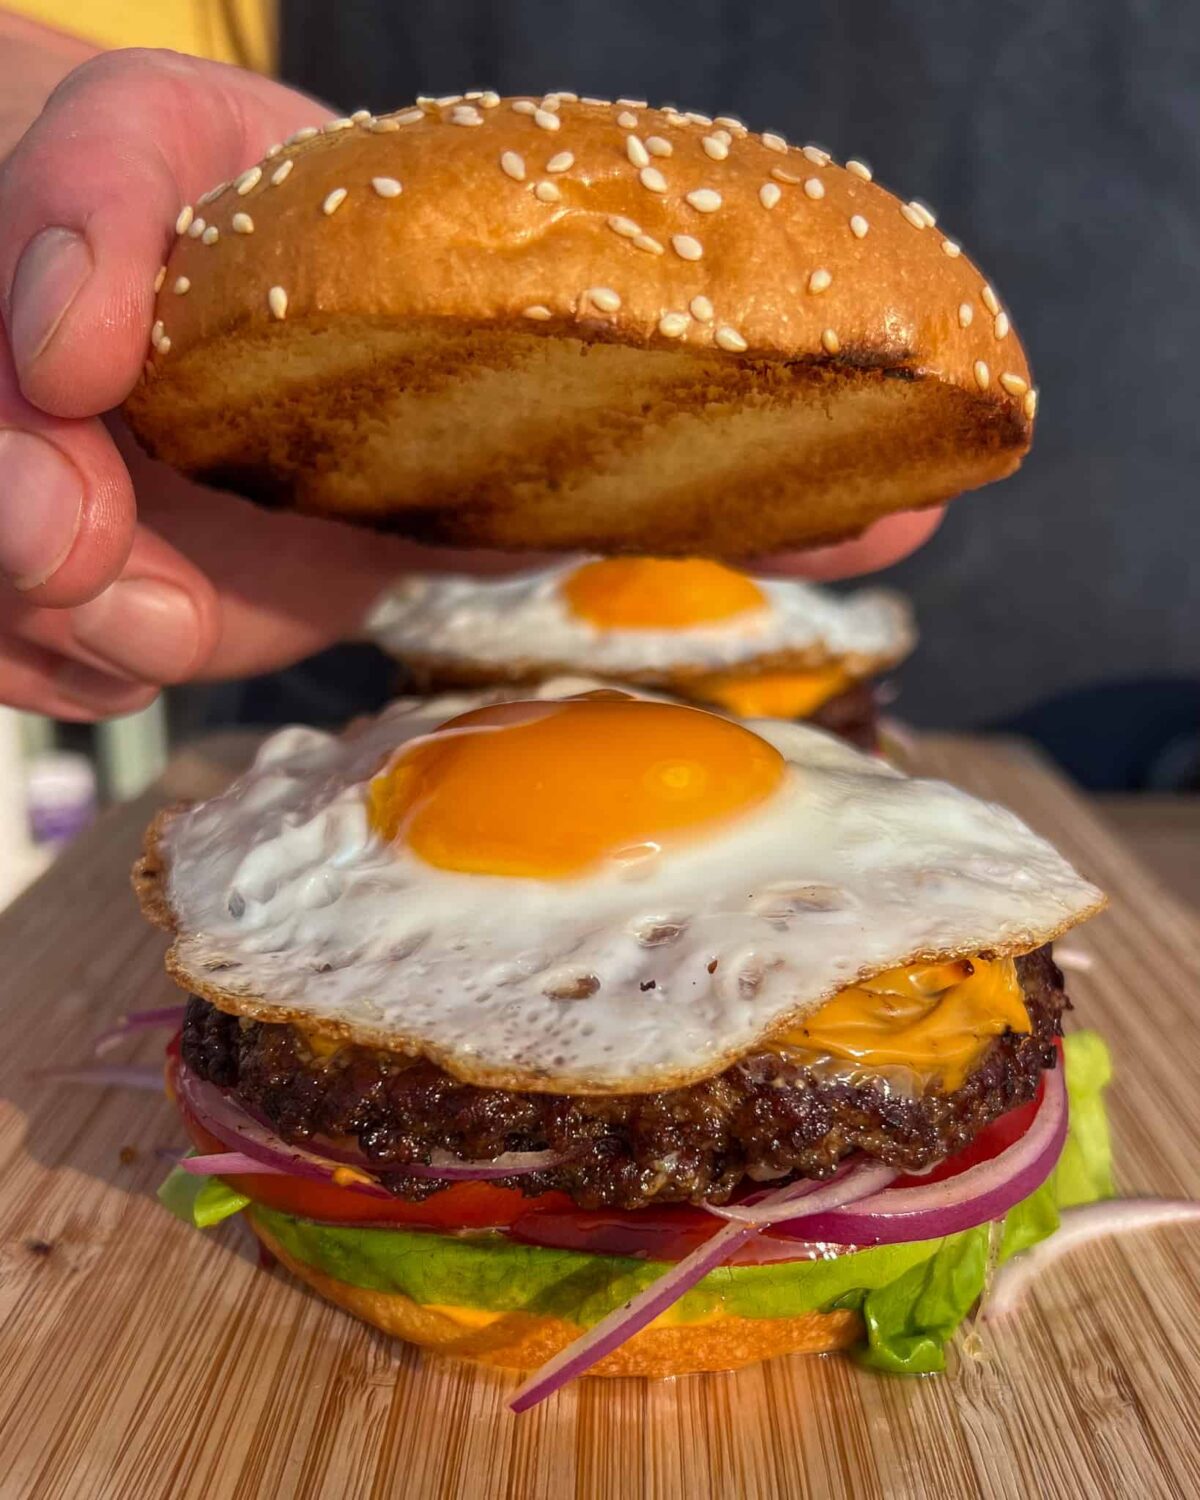 A double smash burger with a fried egg on top getting topped with a sesame seed bun.